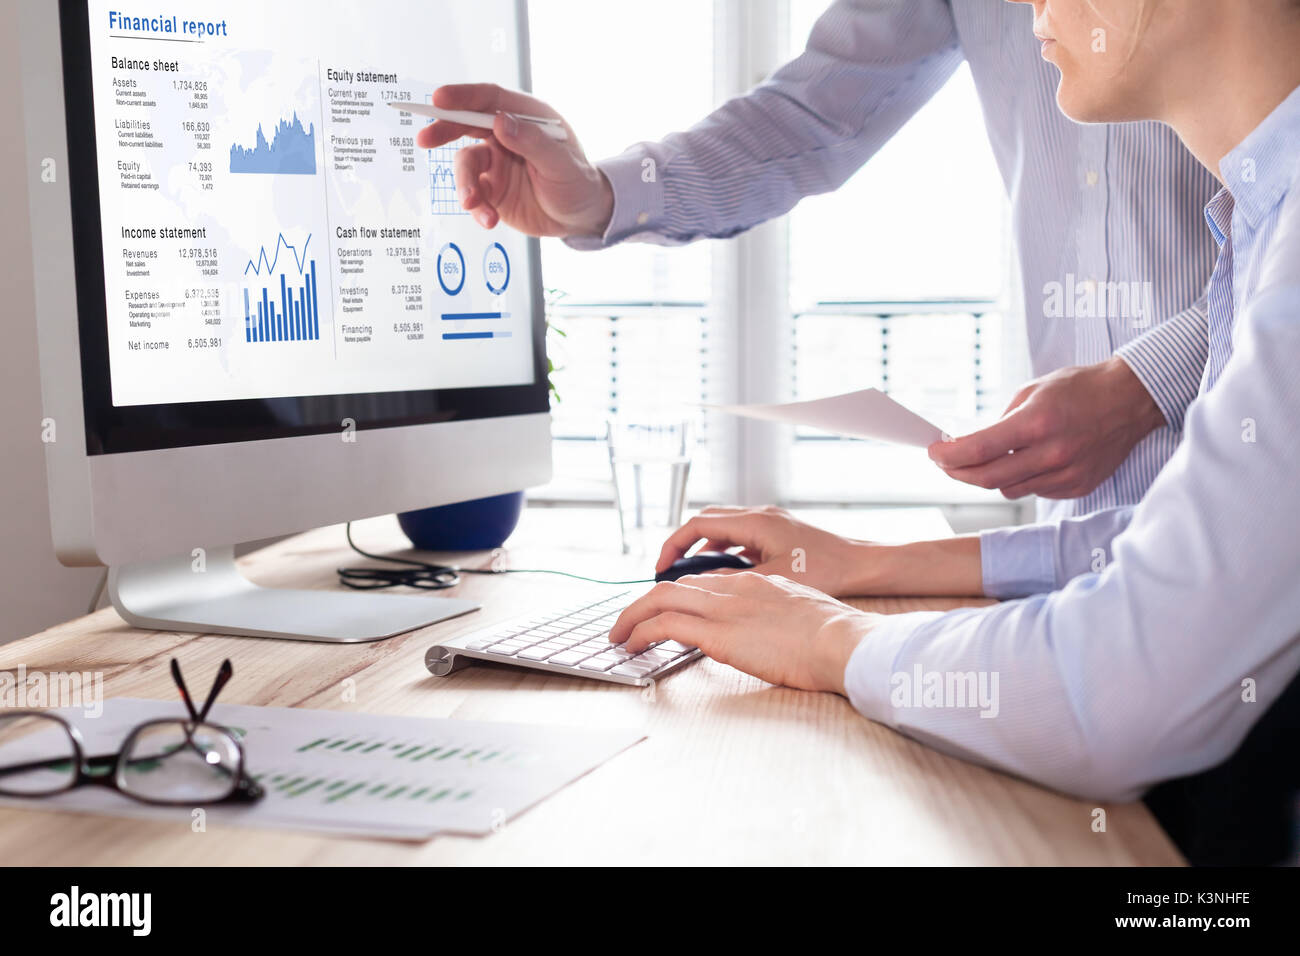 Team of consulting auditors auditing the financial report data of the company (balance sheet, income statement) on computer screen with business chart Stock Photo